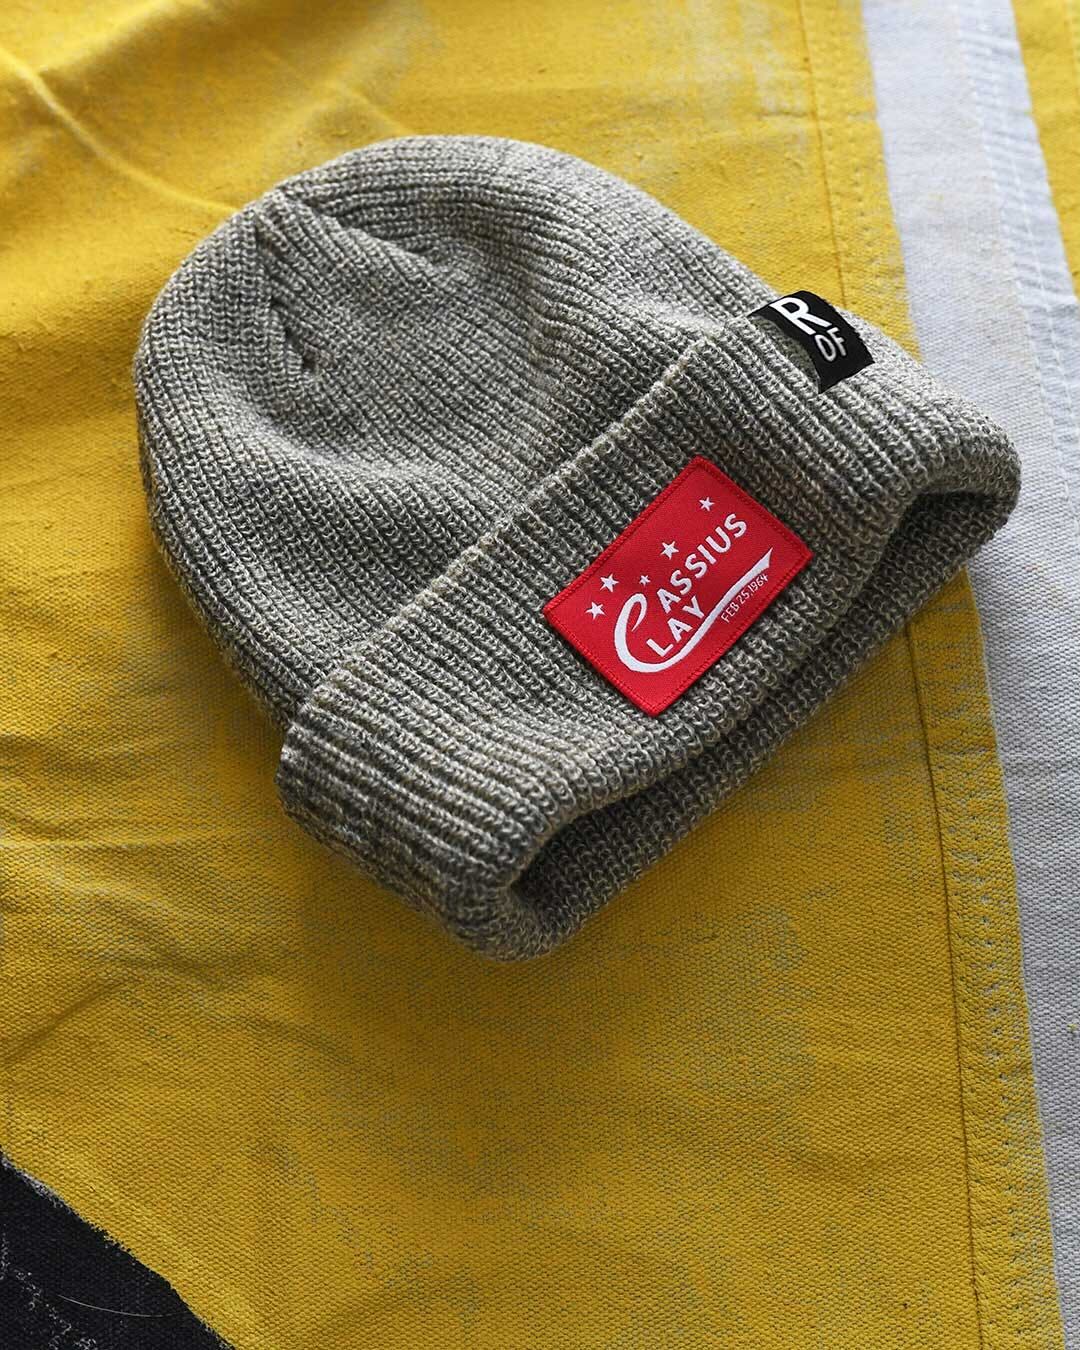 Cassius Clay Heather Tan Beanie - Roots of Fight Canada